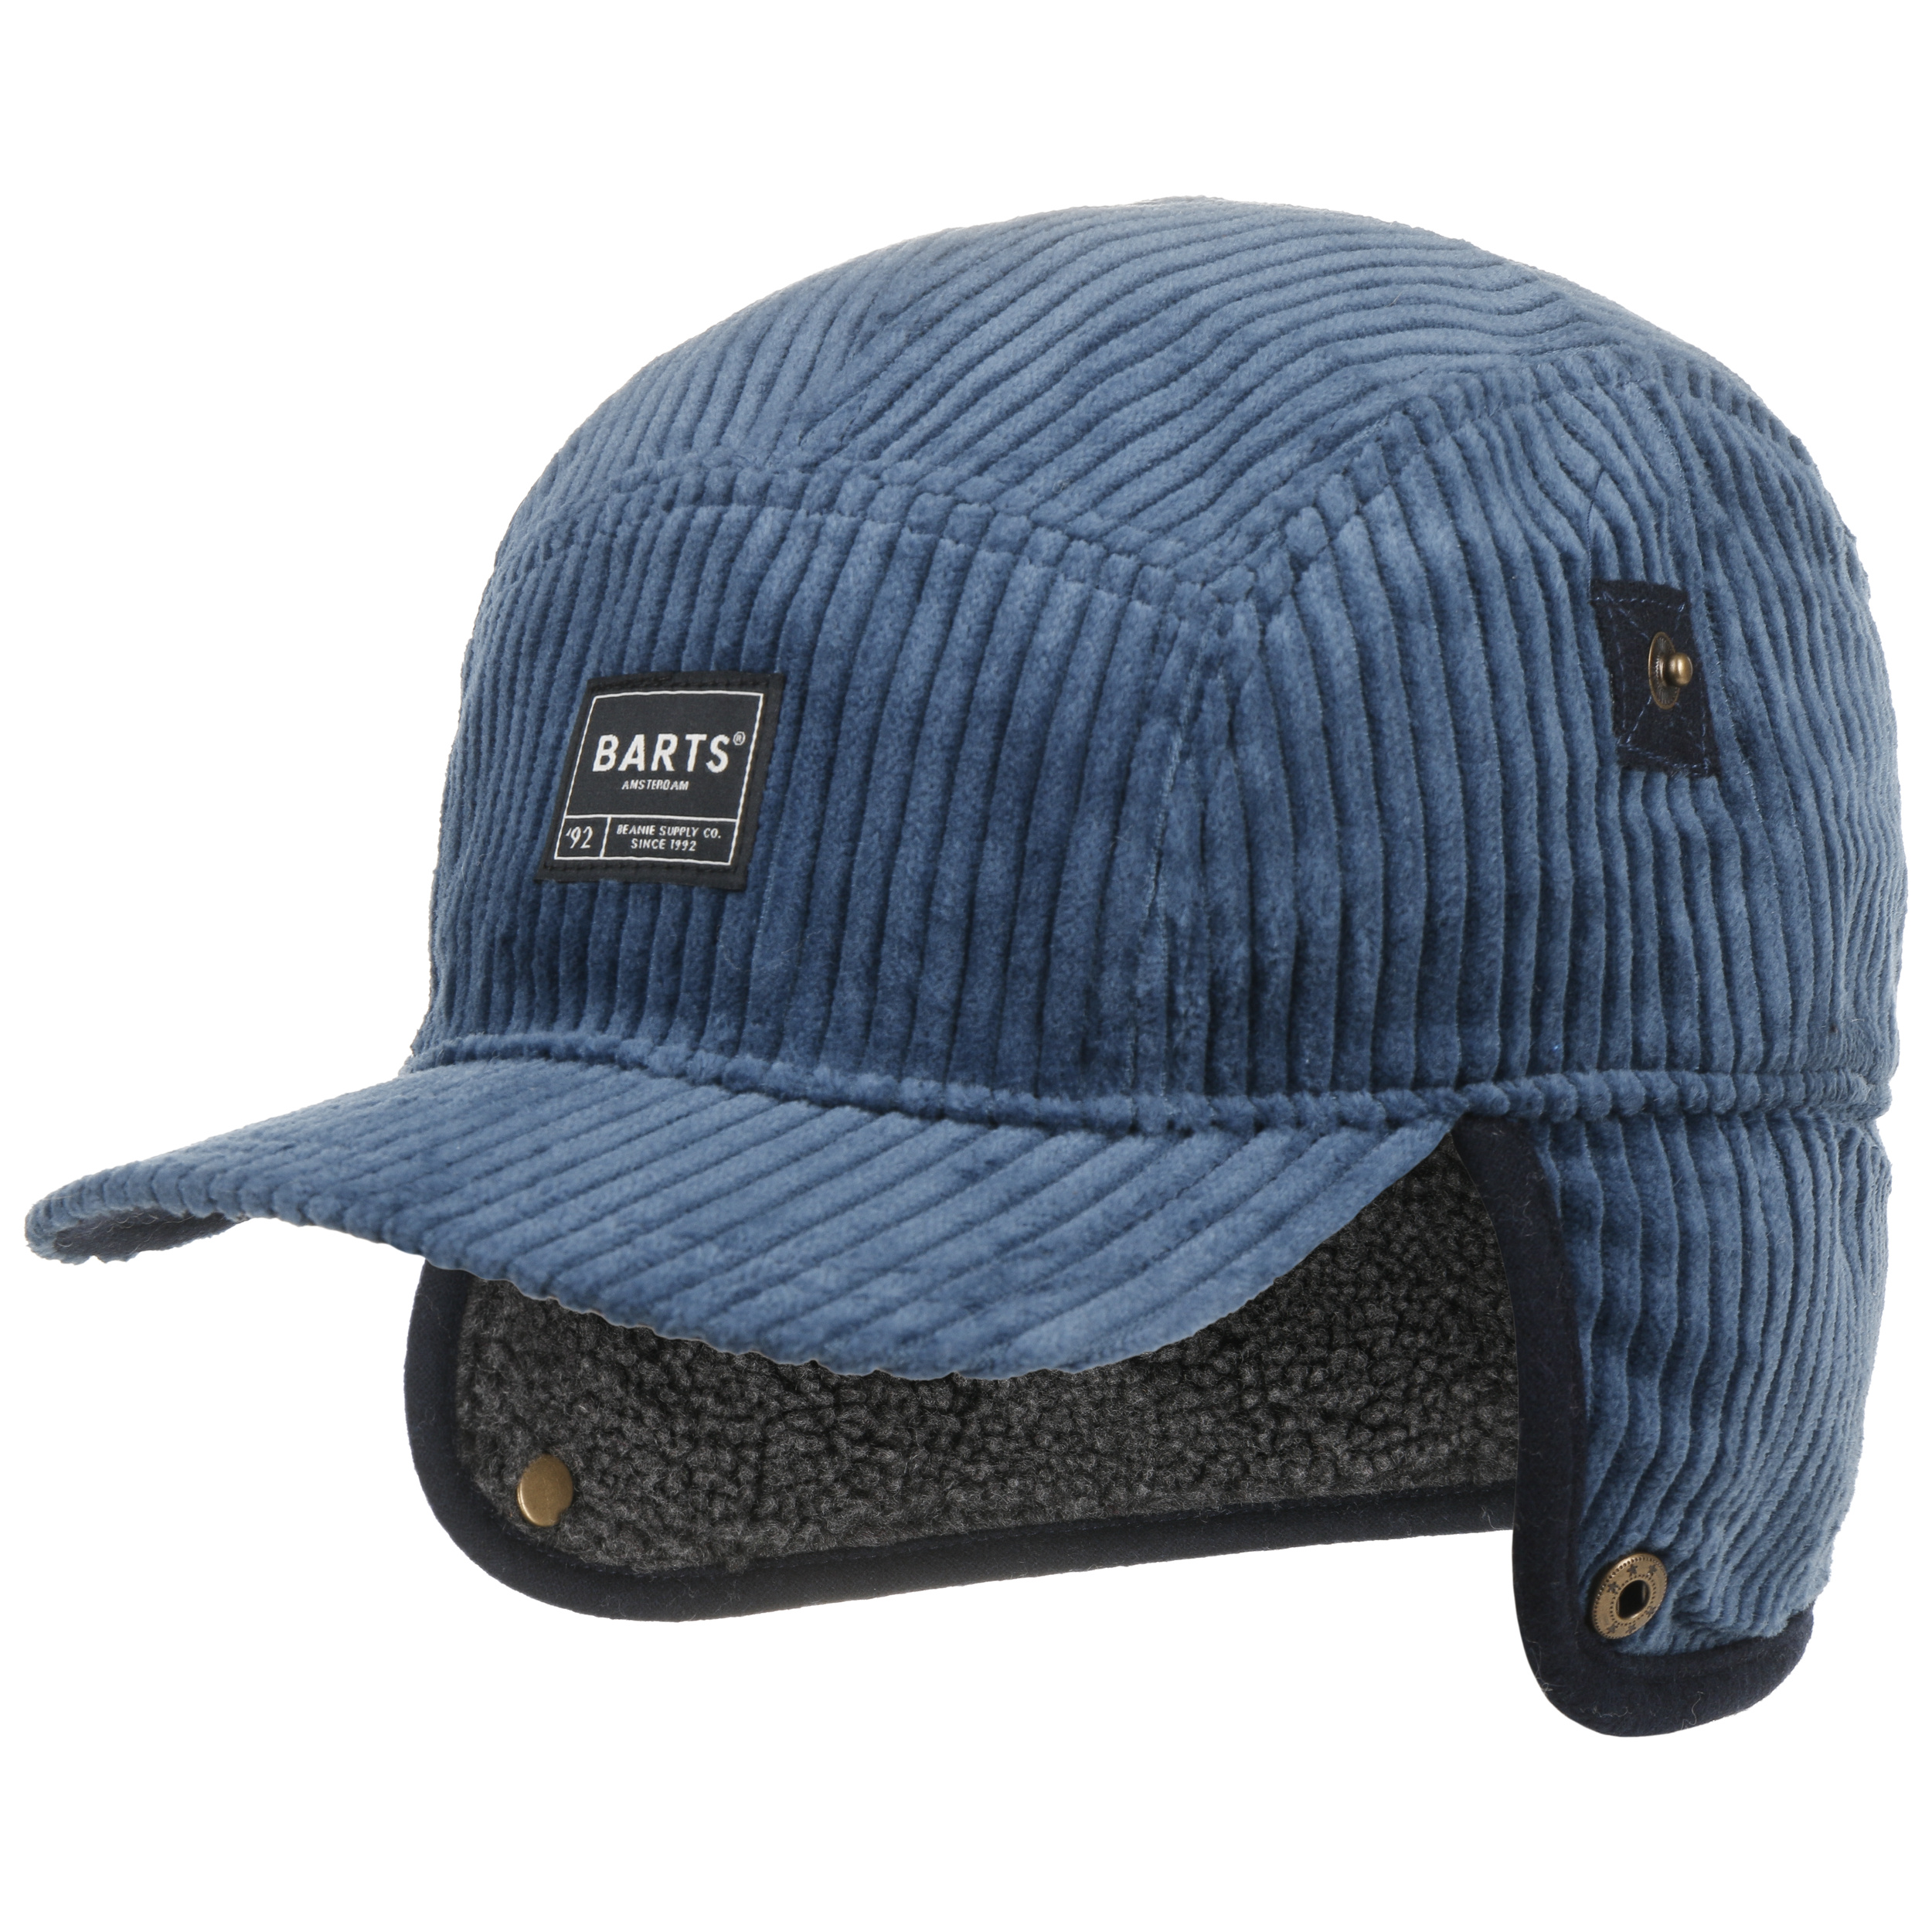 Barts Rayner by € Cap mit - Ohrenklappen 39,99